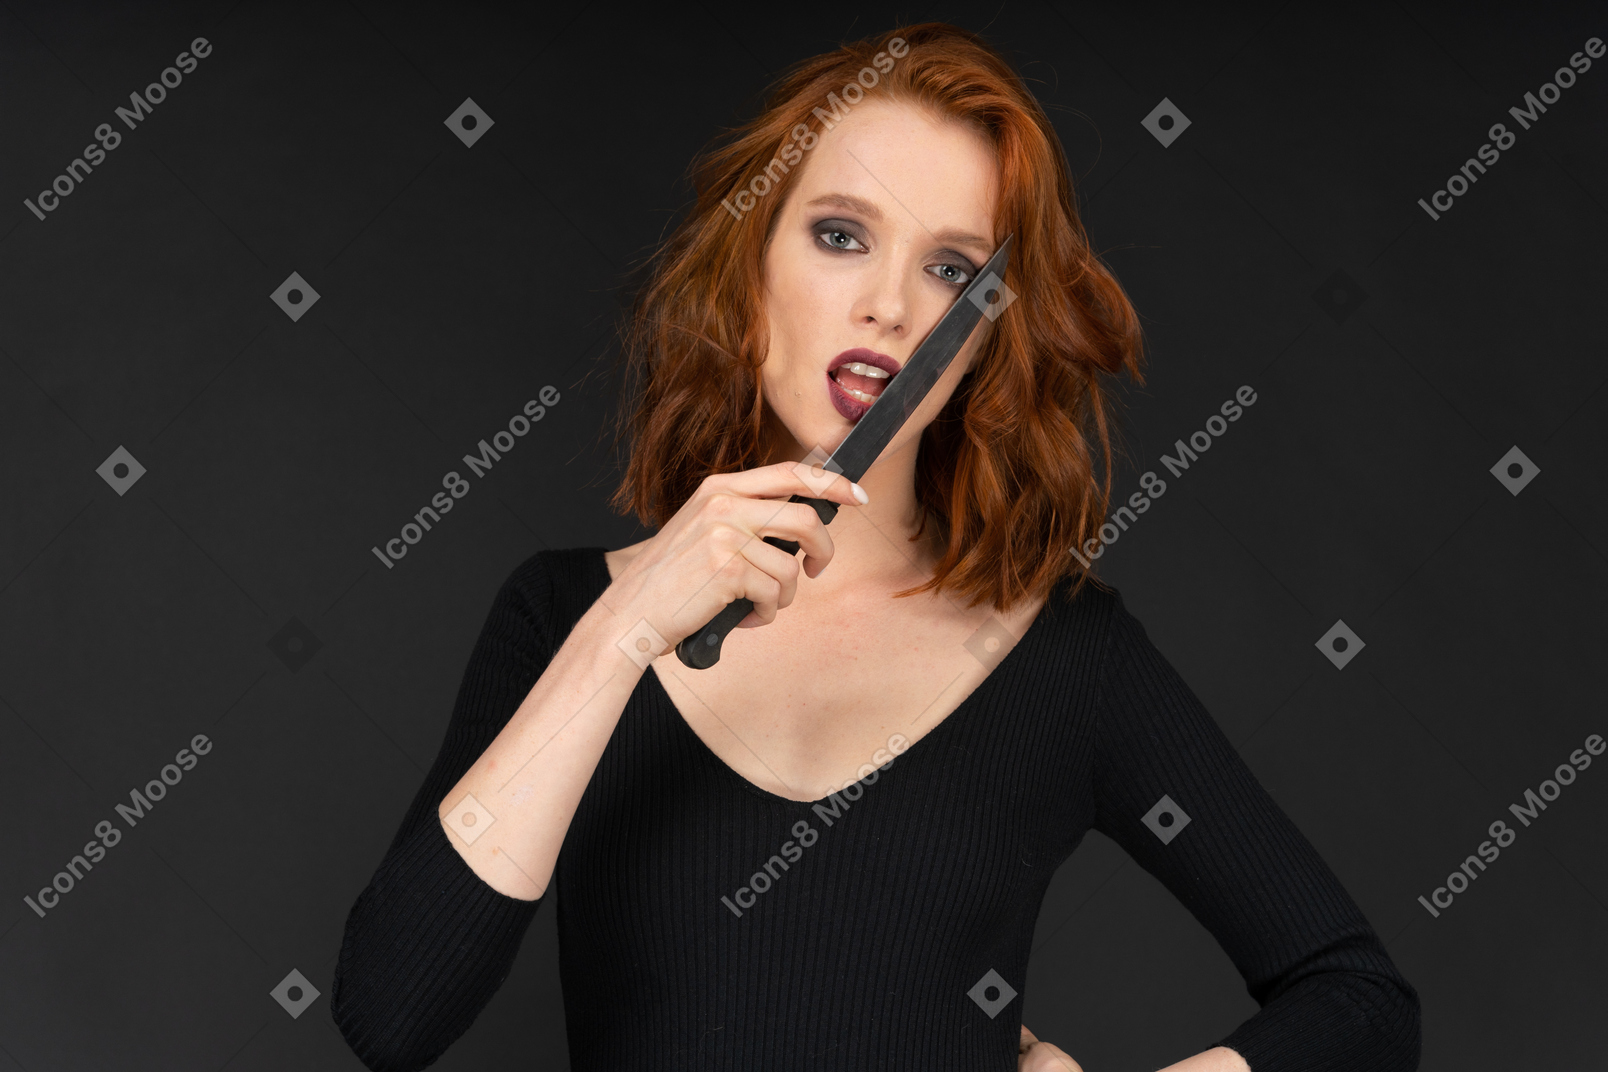 A sexy woman on ther dark background holding the knife close to her mouth